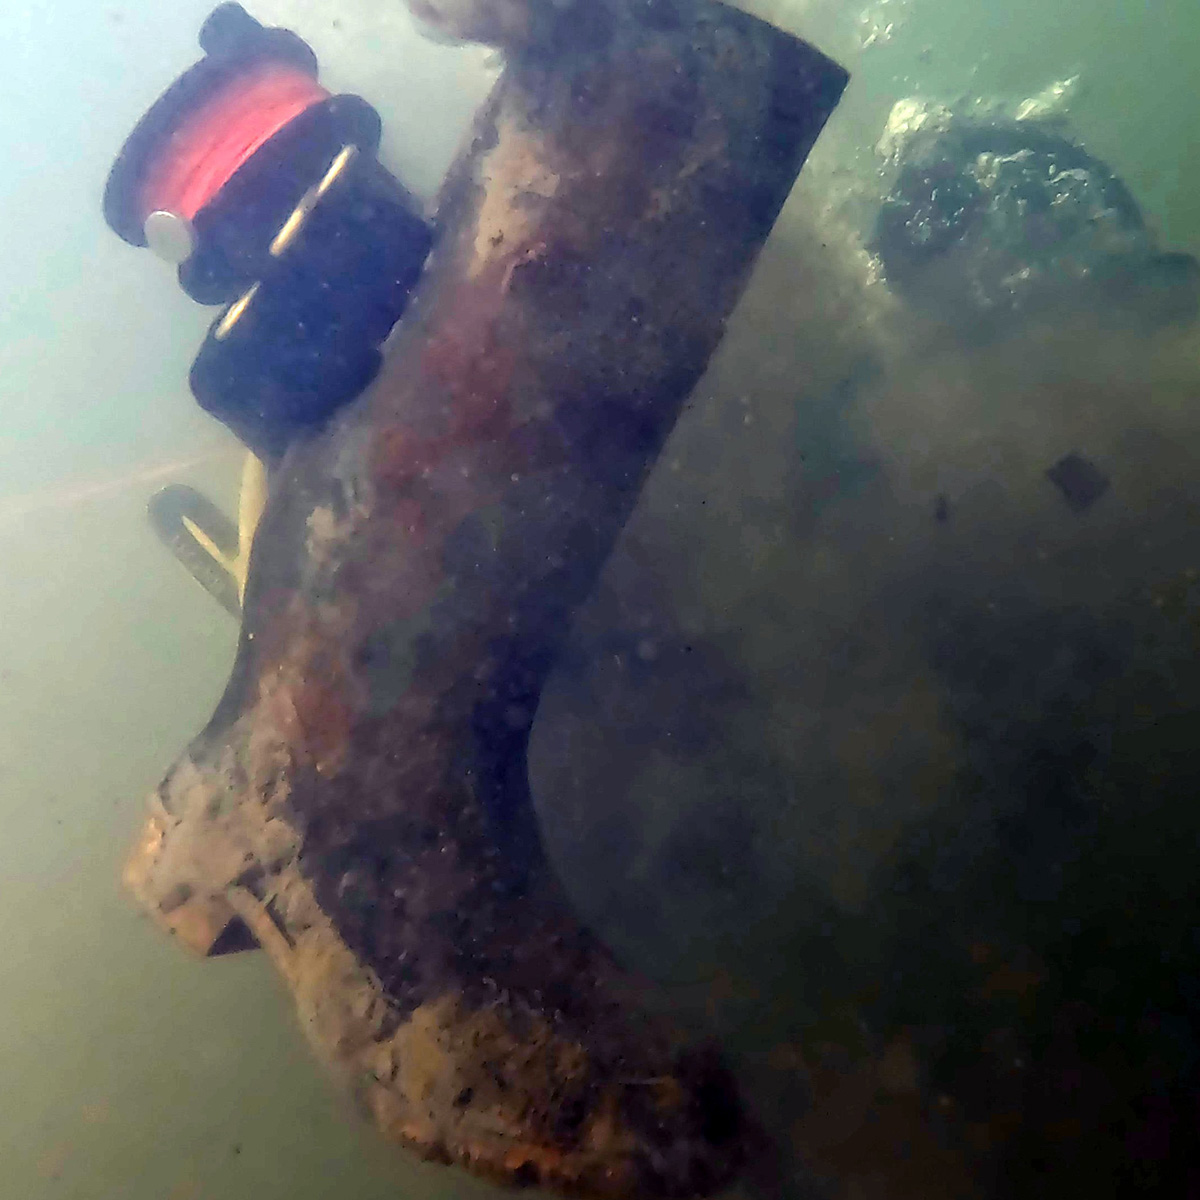 A boot of a Yellowknife citizen SLt Hagen found at the bottom of the Great Slave Lake.